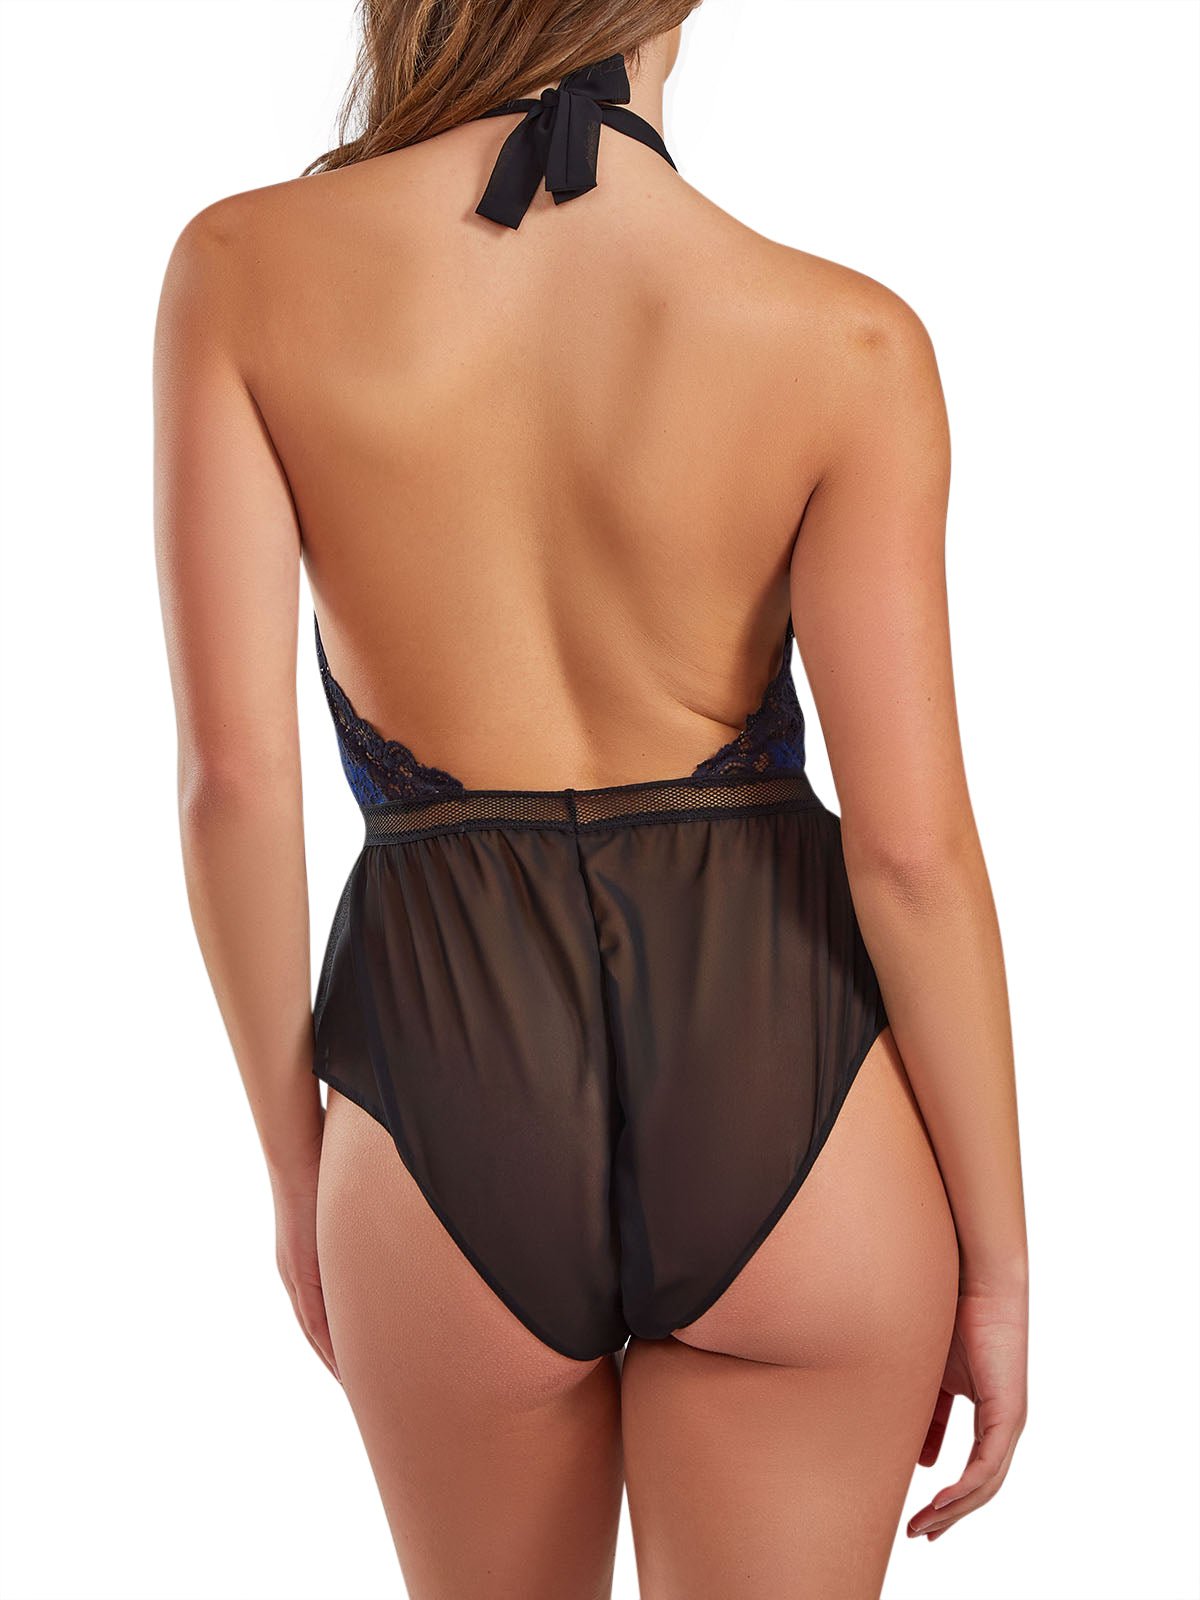 iCollection Teddy Women&#39;s Marley Teddy Lingerie